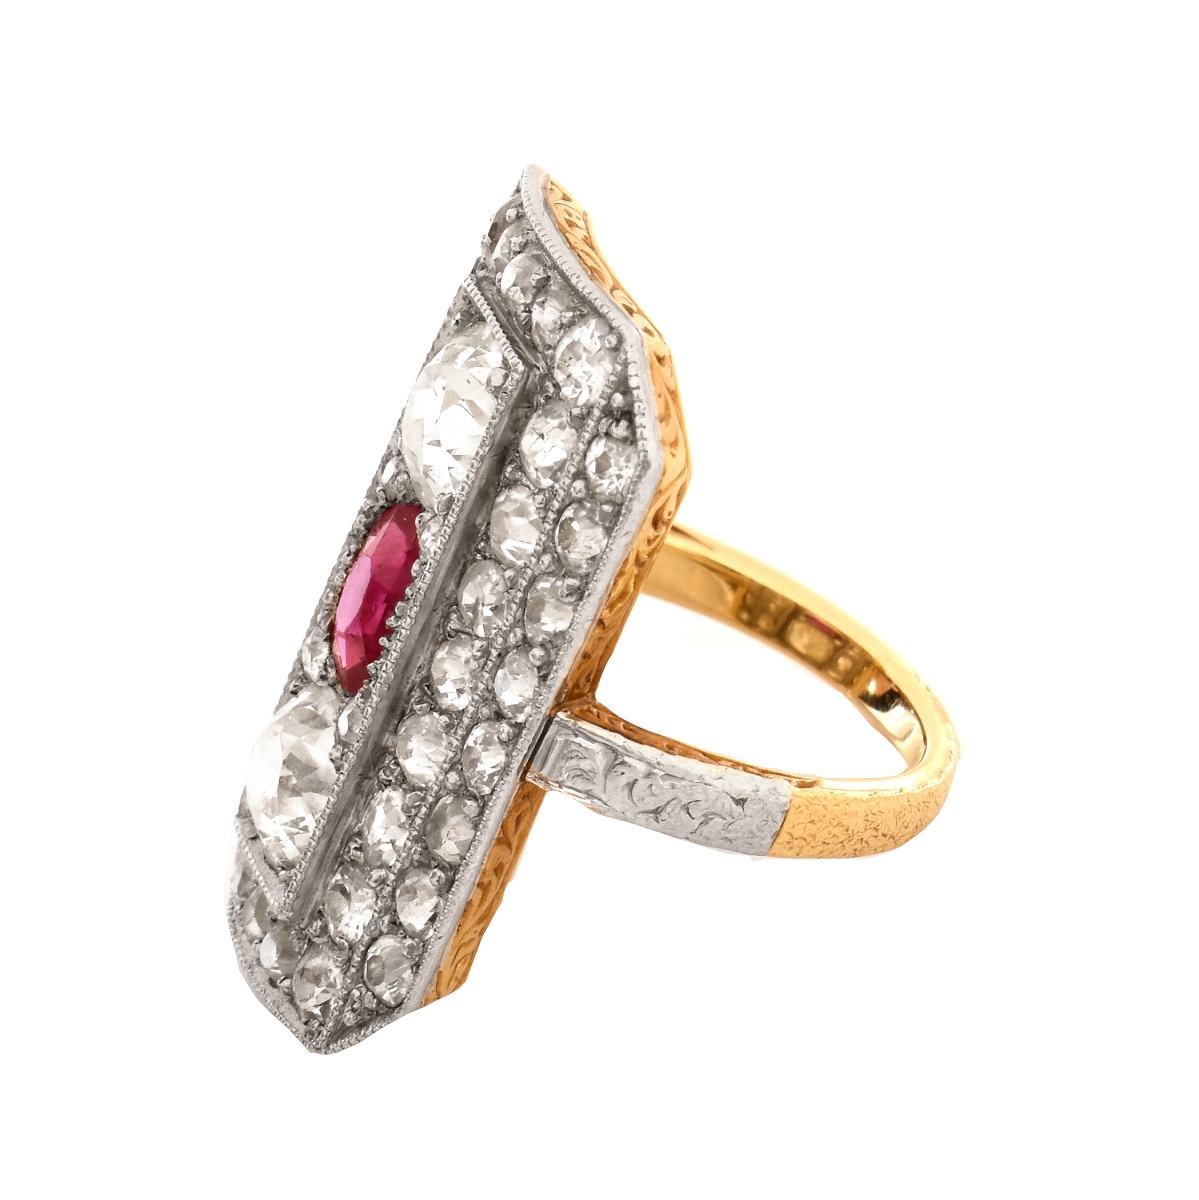 Antique Diamond and Ruby Ring